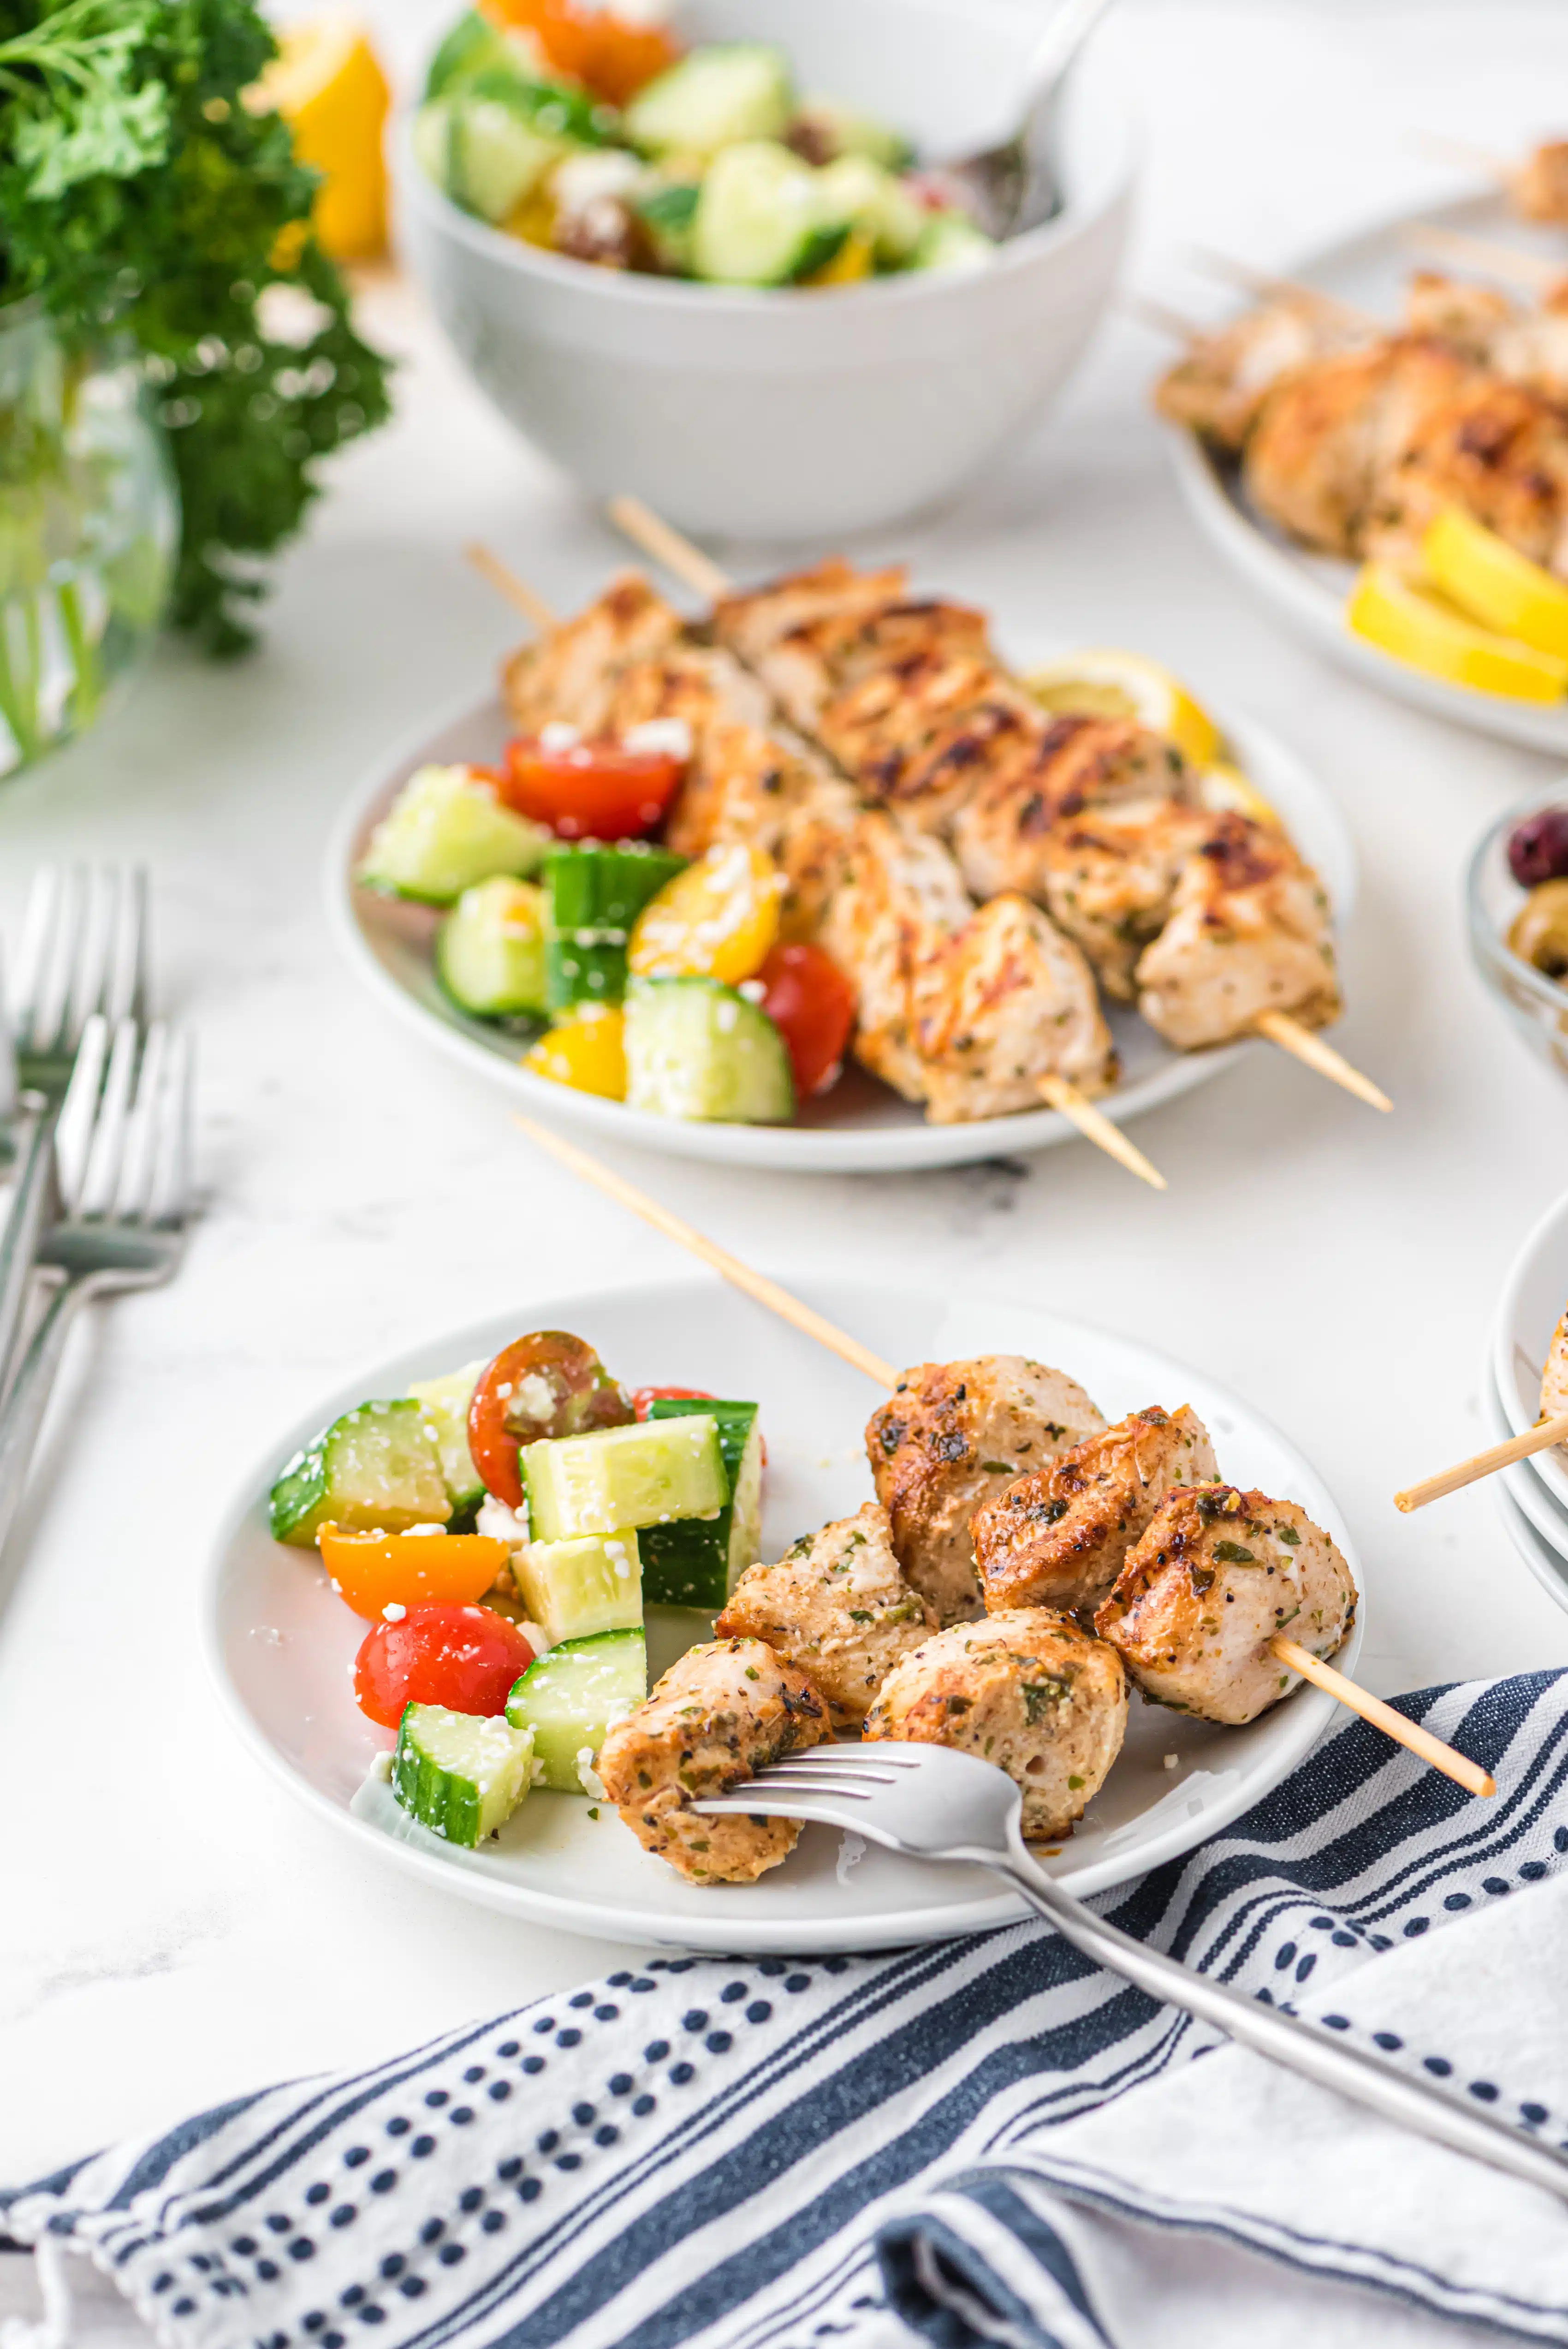 Two dinner plates filled with two chicken skewers, lemon slices, and a side of greek salad.